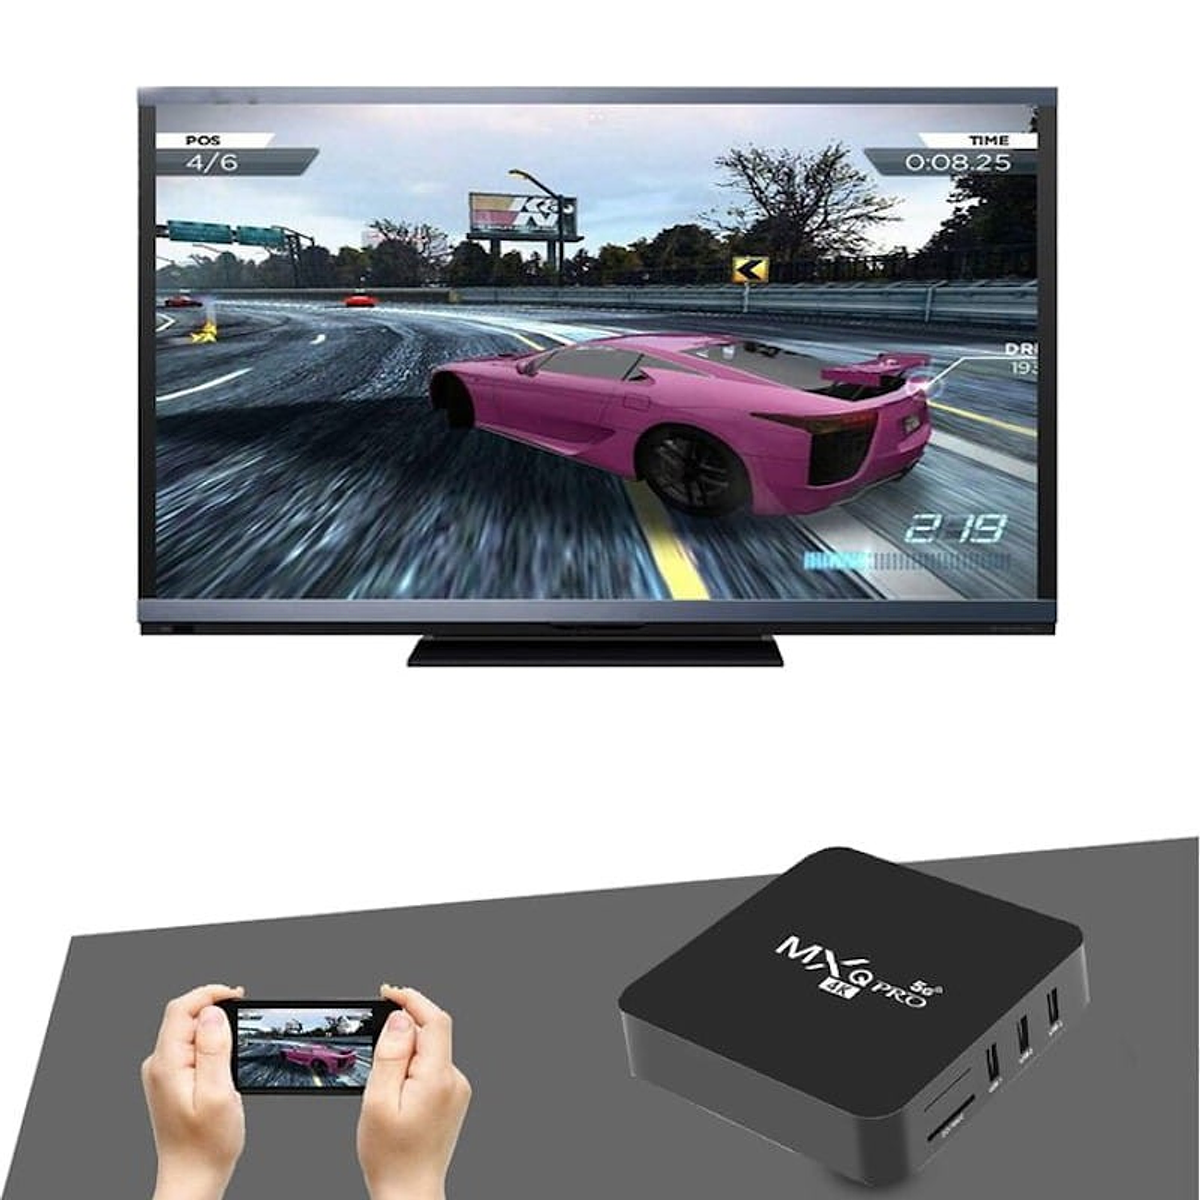 MXQ Pro 5G 4k Android TV Box 1gb Ram 8gb ROM Internet TV Multimedia Gateway  for All LCD / LED TV at Rs 1320/piece, Android TV Box in Bengaluru